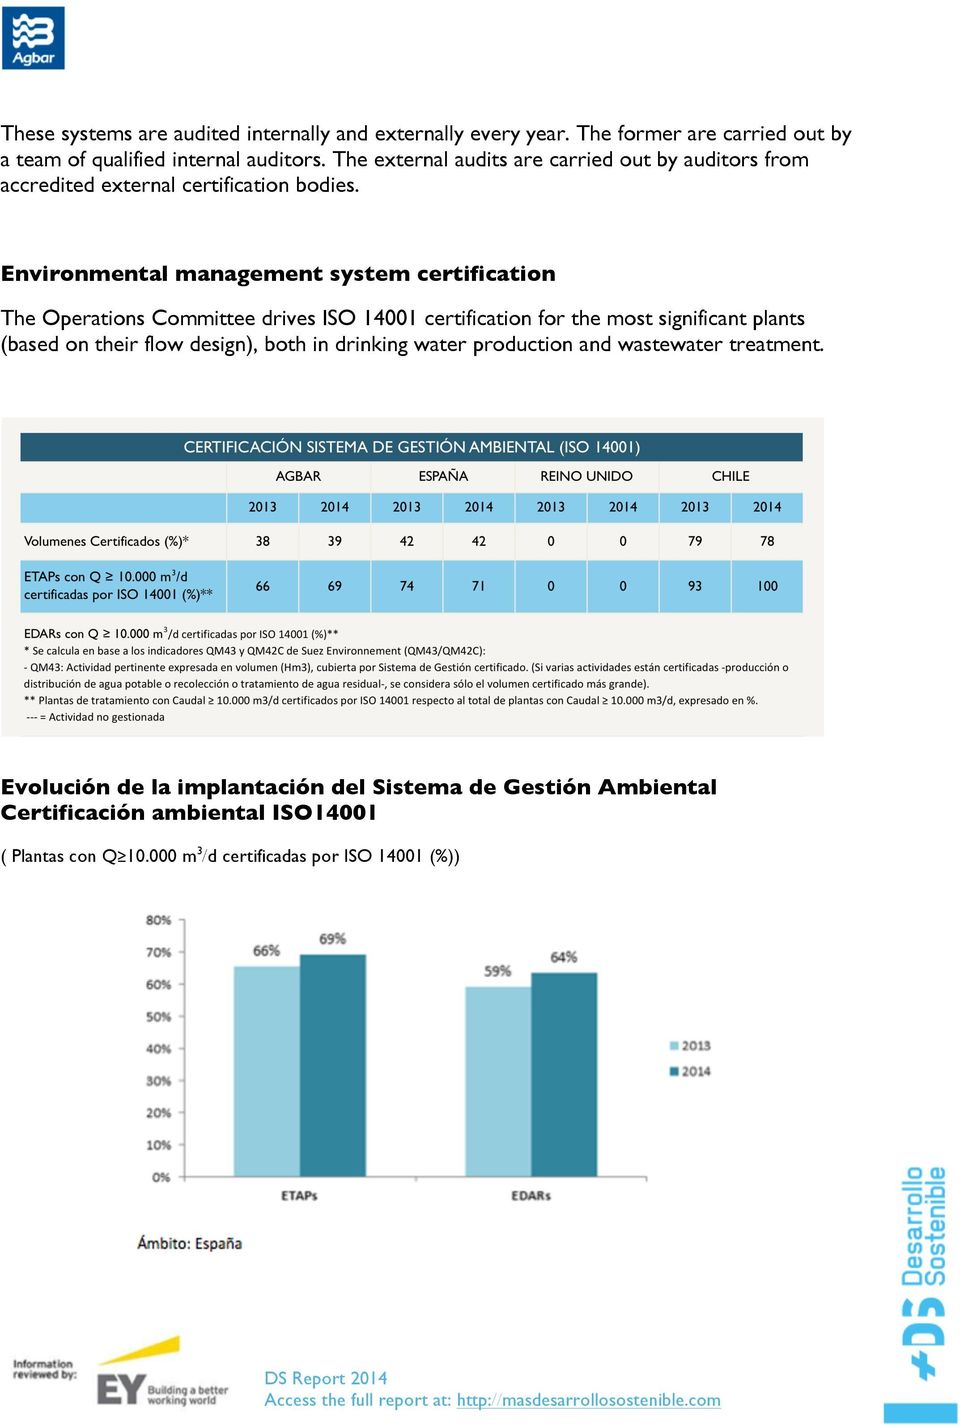 Environmental management system certification The Operations Committee drives ISO 14001 certification for the most significant plants (based on their